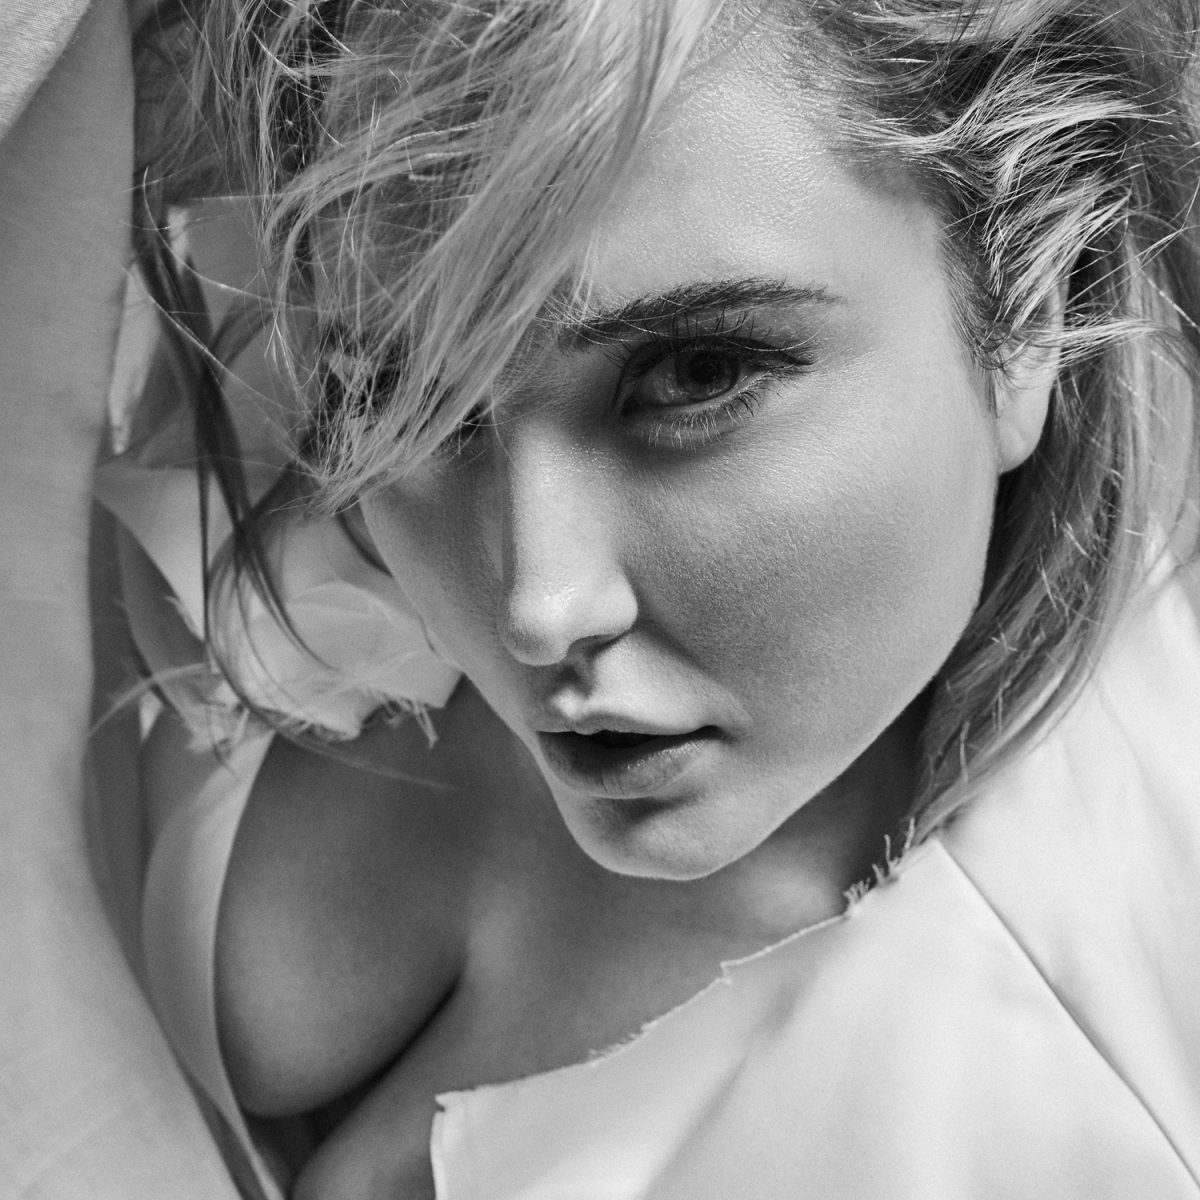 EXCLUSIVE INTERVIEW HAYLEY HASSELHOFF ON BODY POSITIVITY, MENTAL HEALTH AWARENESS, AND HER JOURNEY AS CURVE MODEL AND ACTIVIST THE UNTITLED MAGAZINE